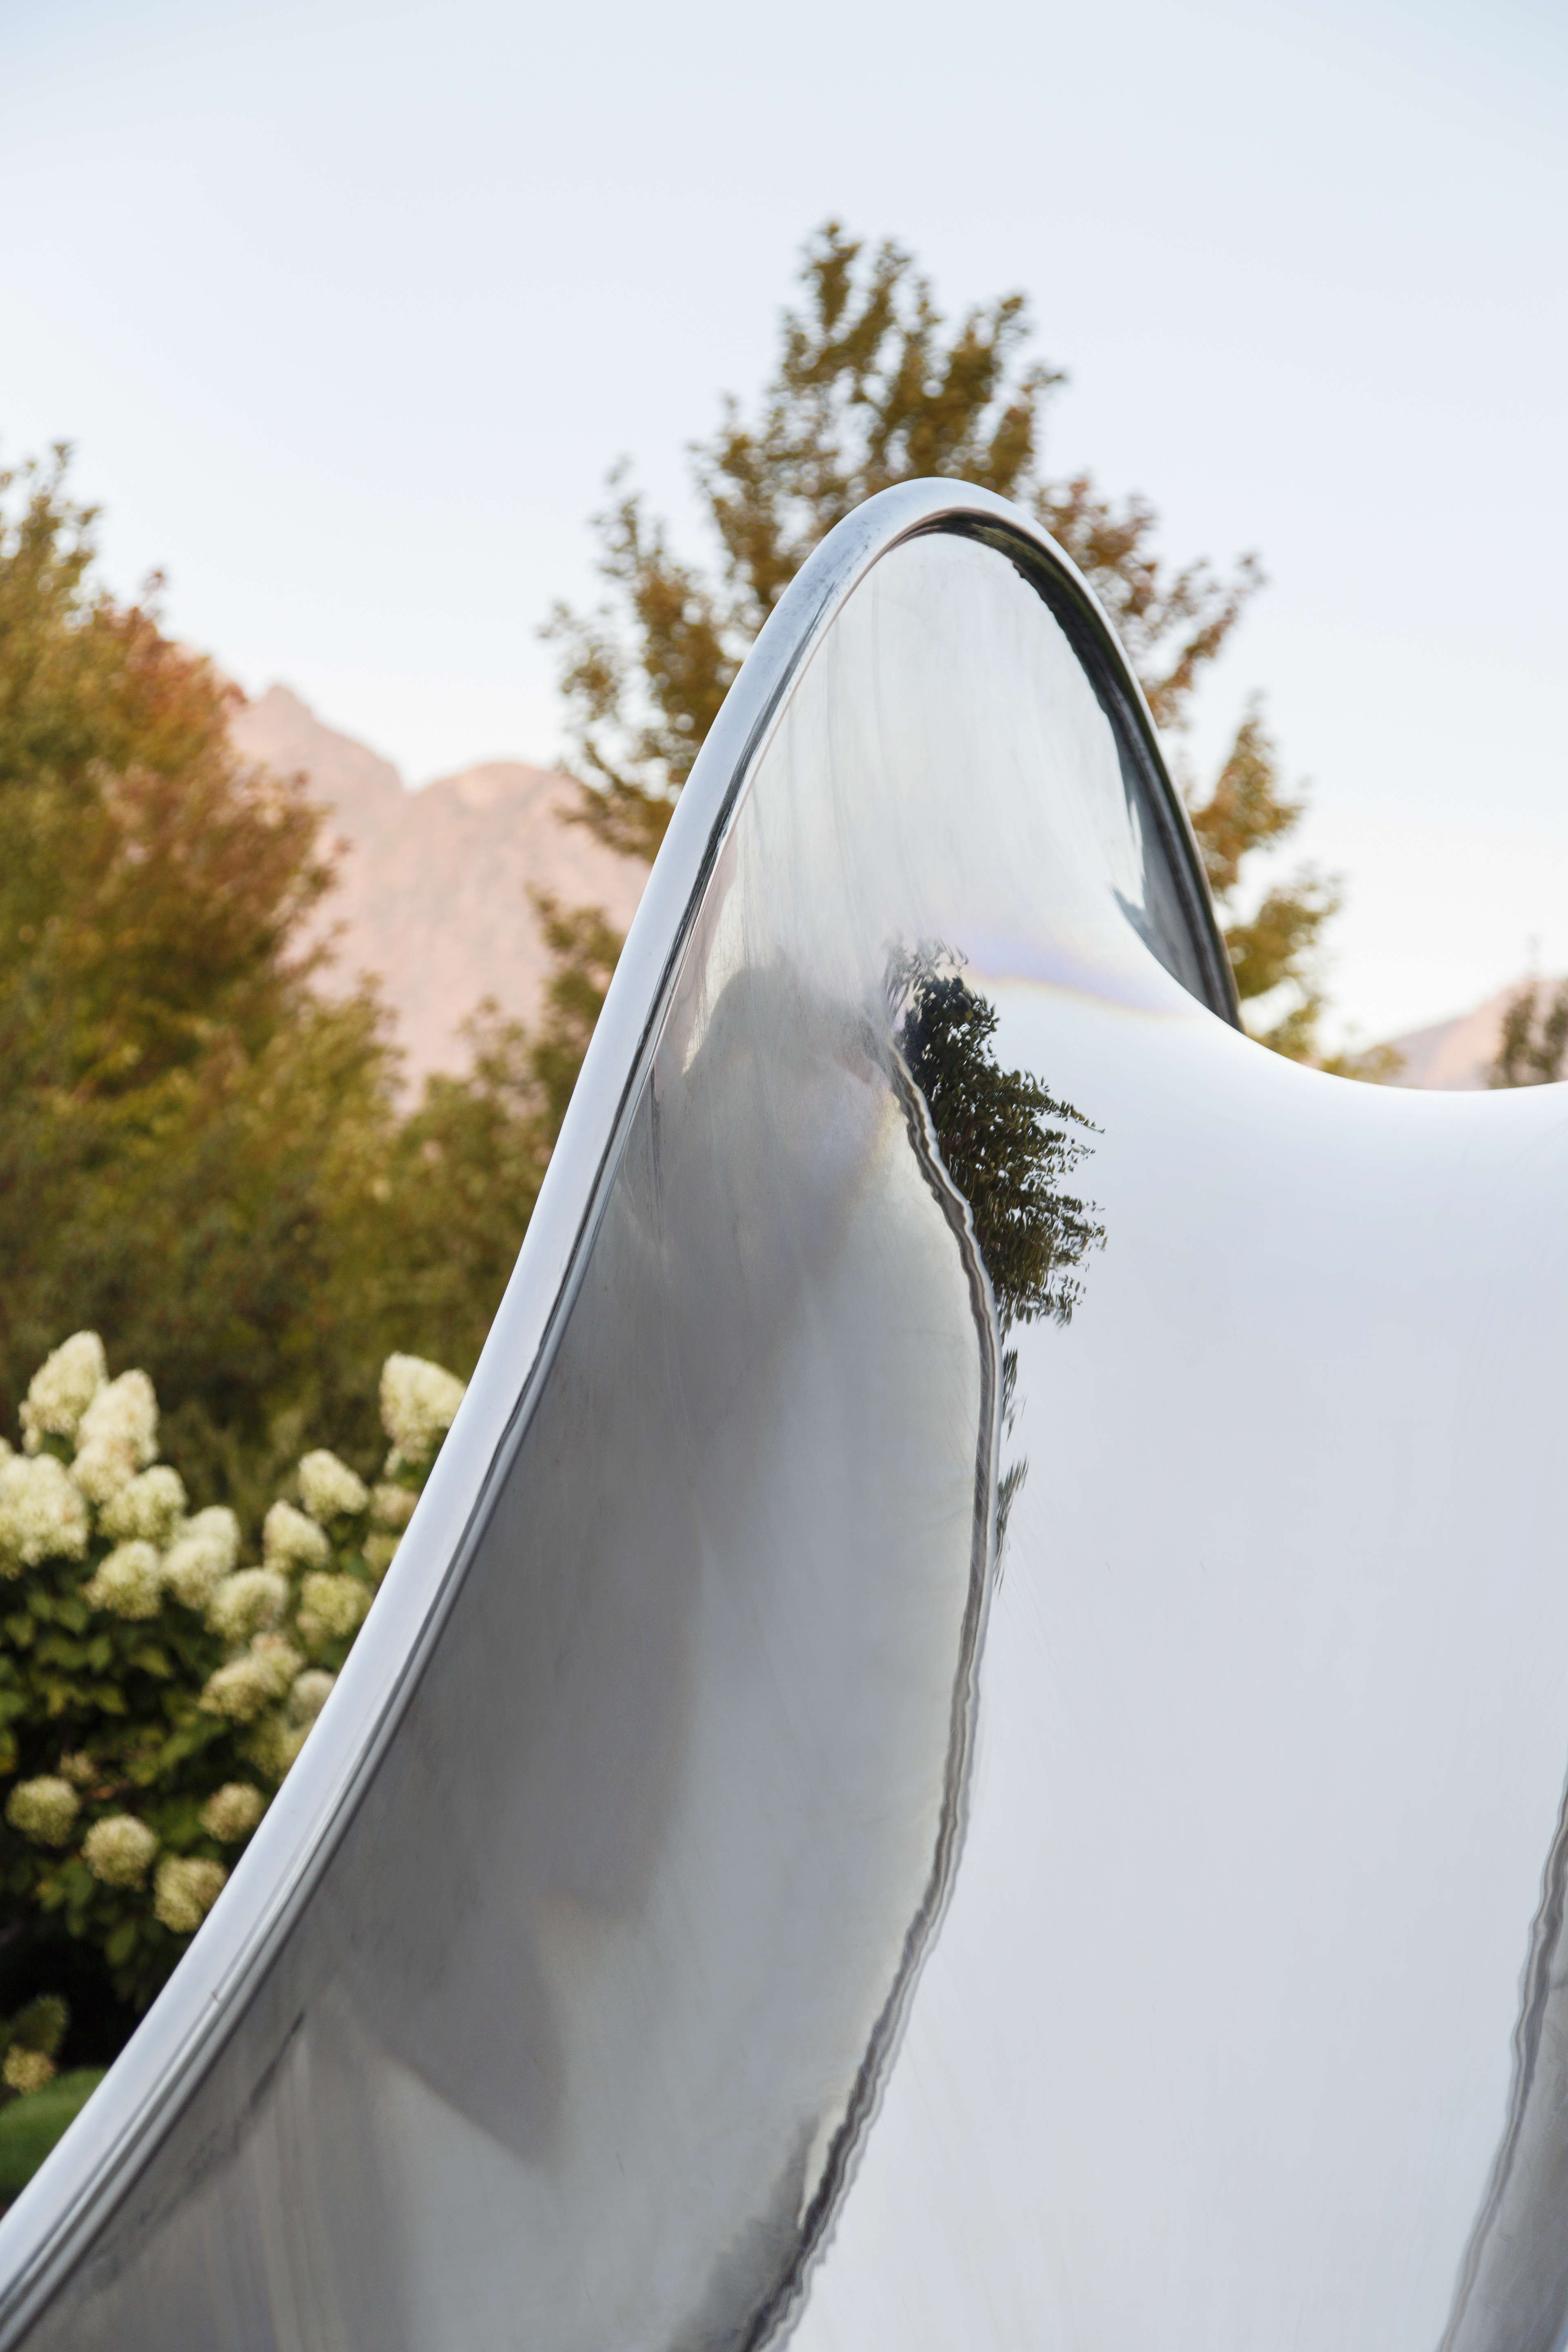 Close up of mirror polished water slide